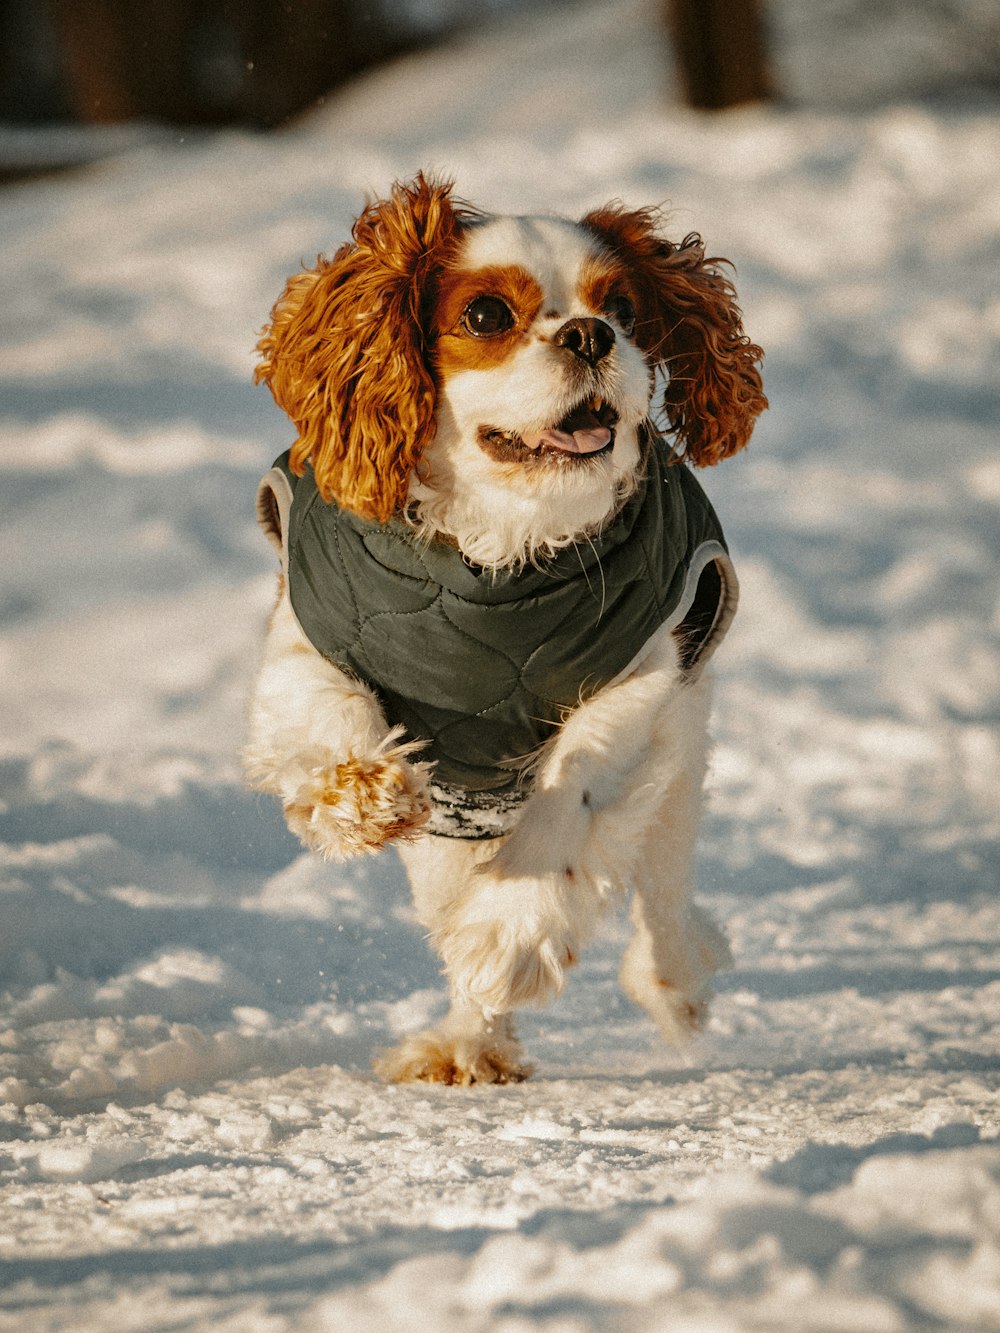 a dog running in the snow wearing a jacket